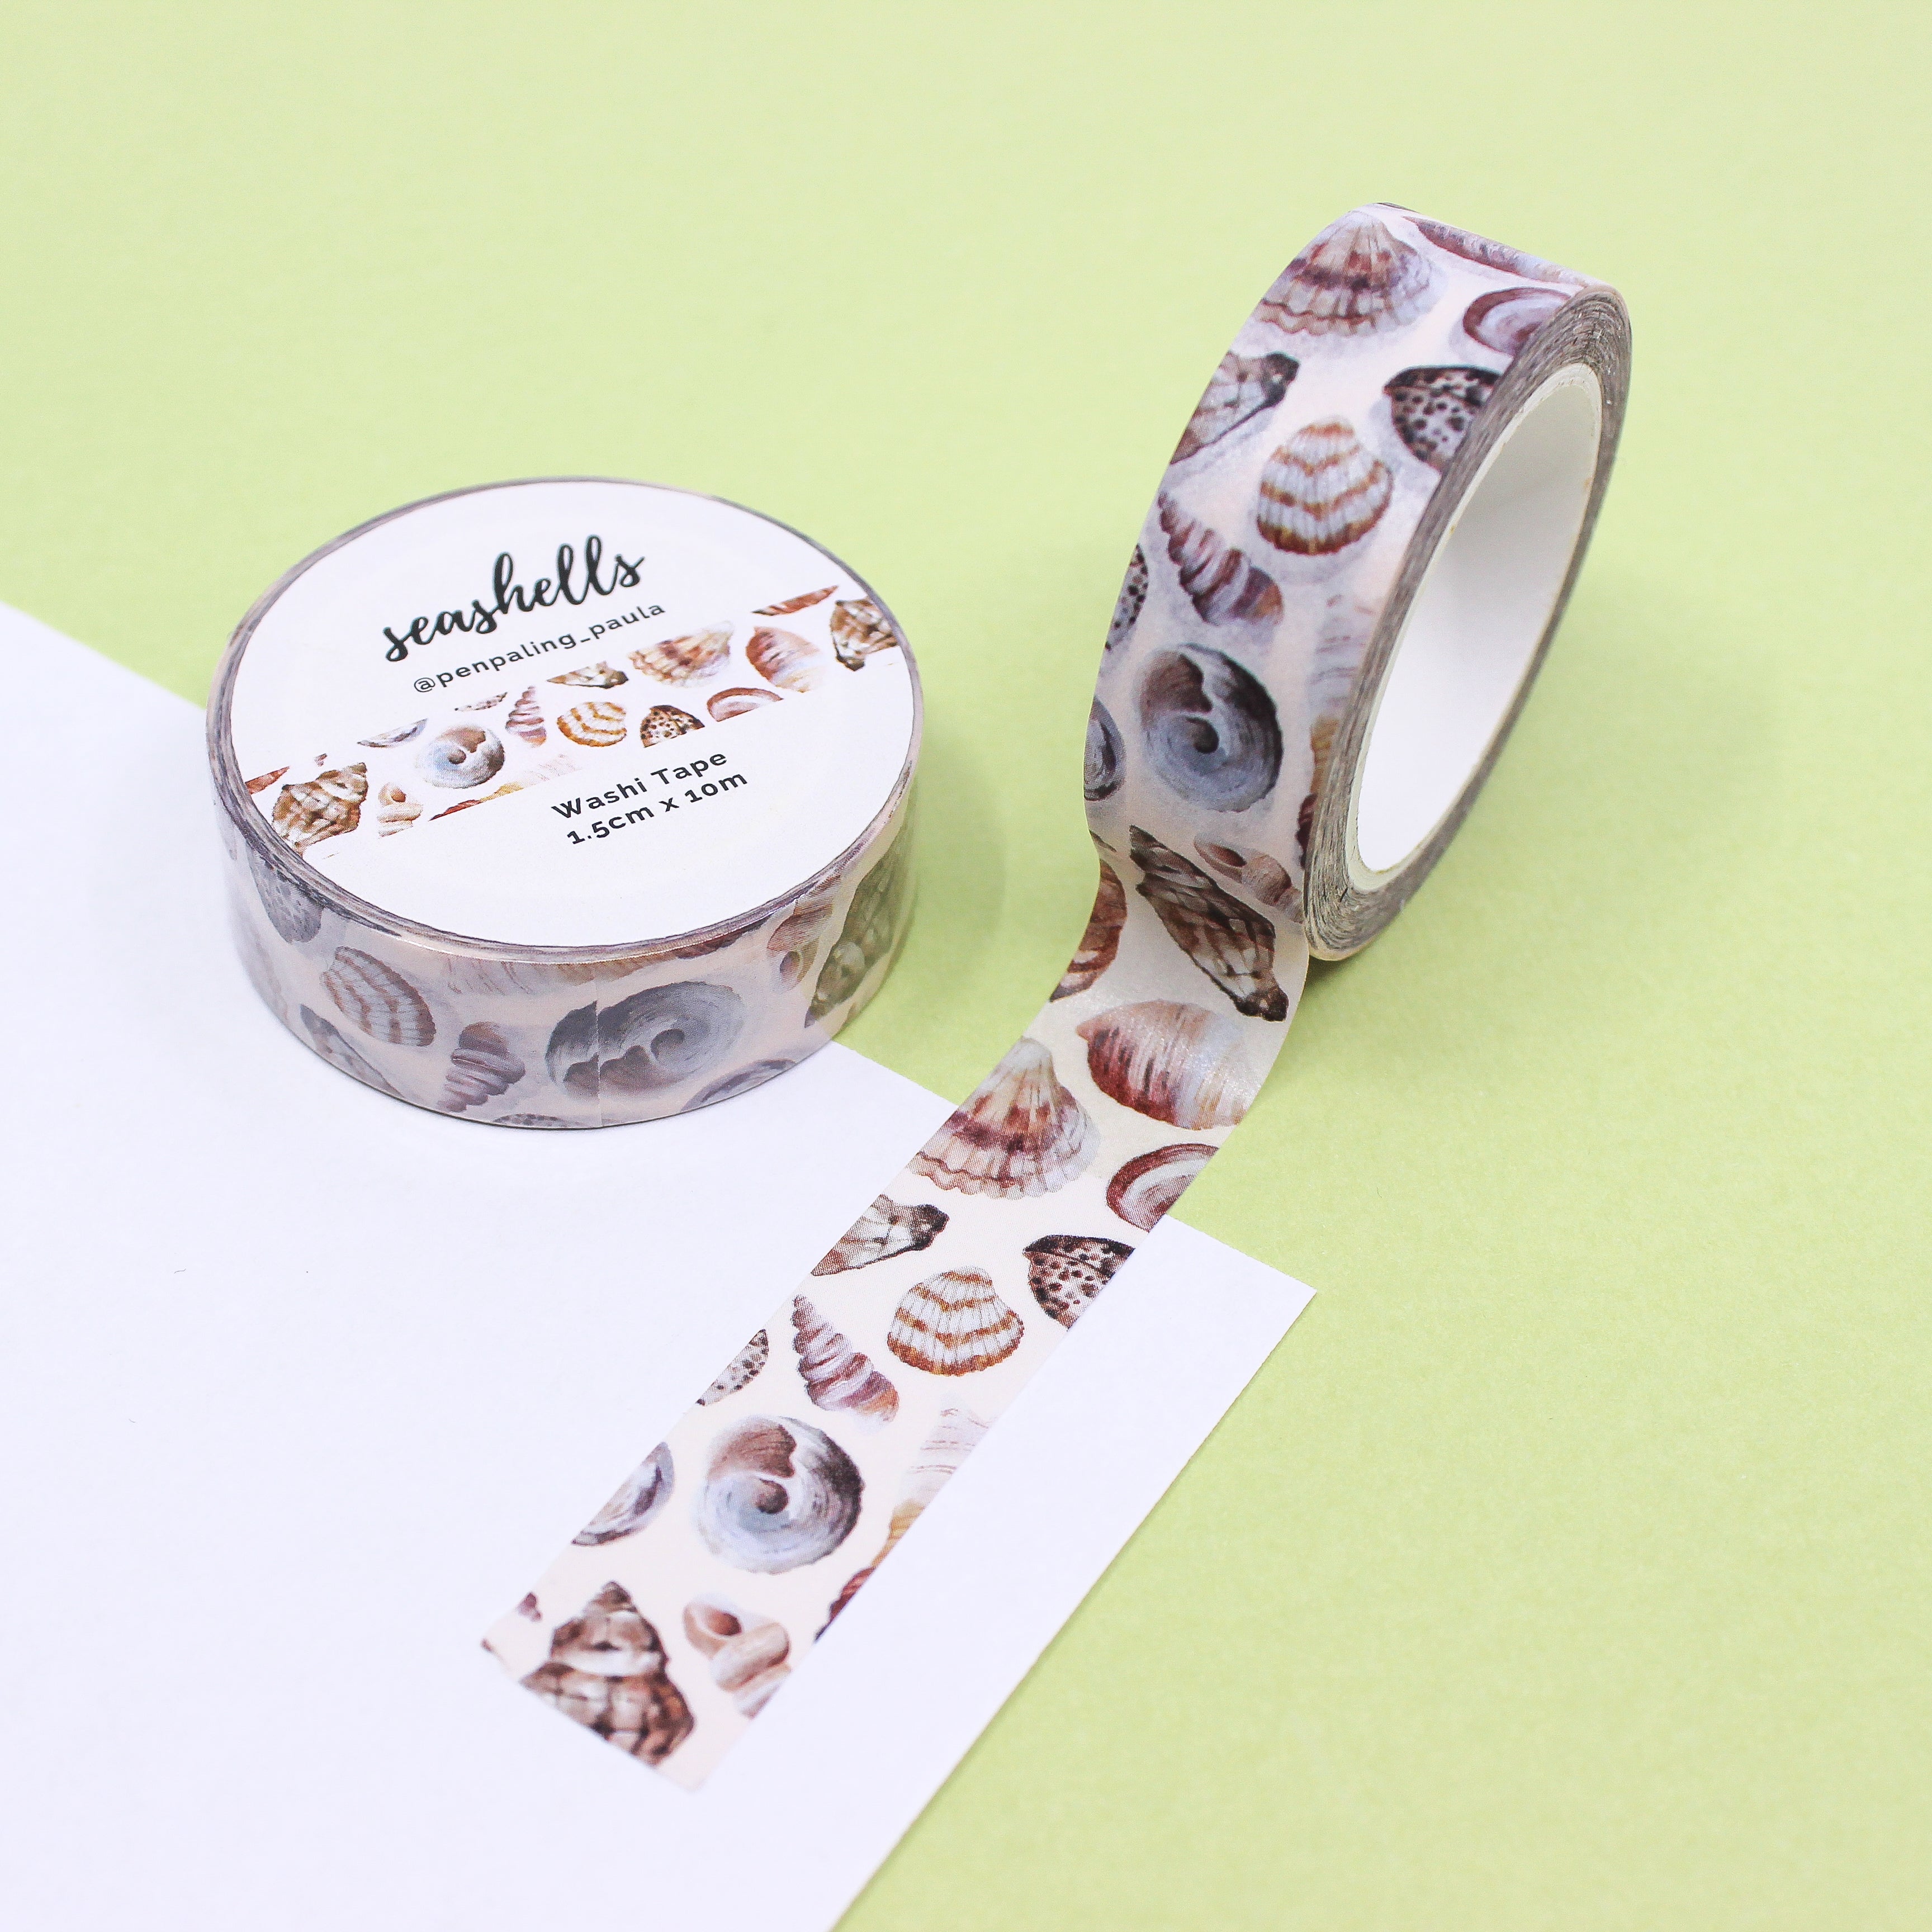 This is a collection of brown seashells themed washi tape from BBB Supplies Craft Shop